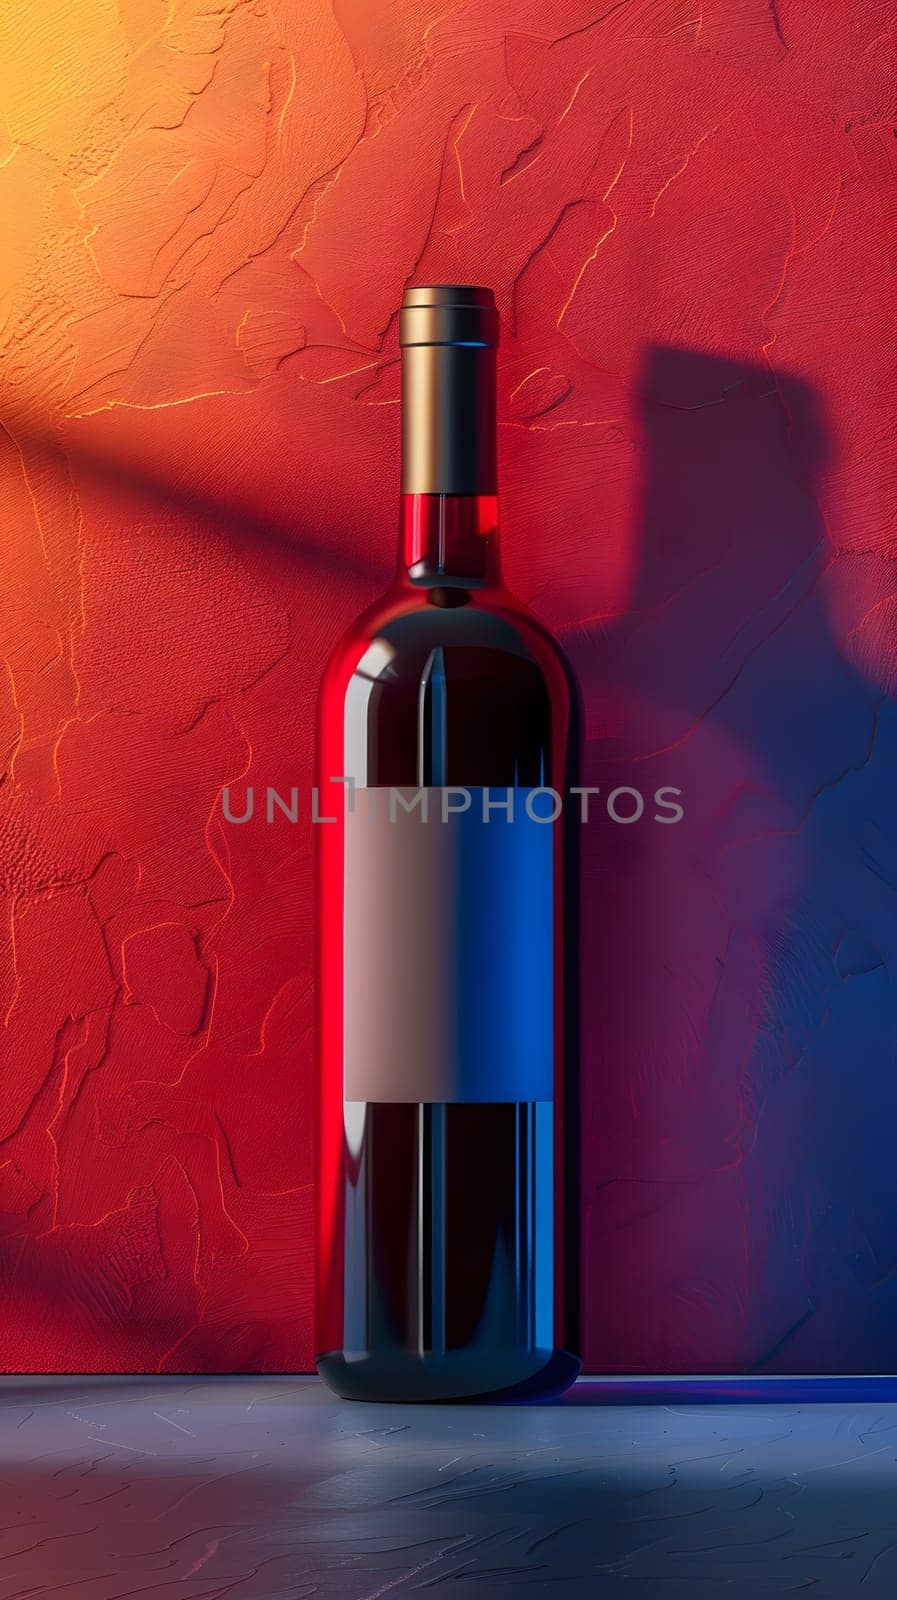 A red wine bottle stands on a table with red and blue walls behind it by Nadtochiy